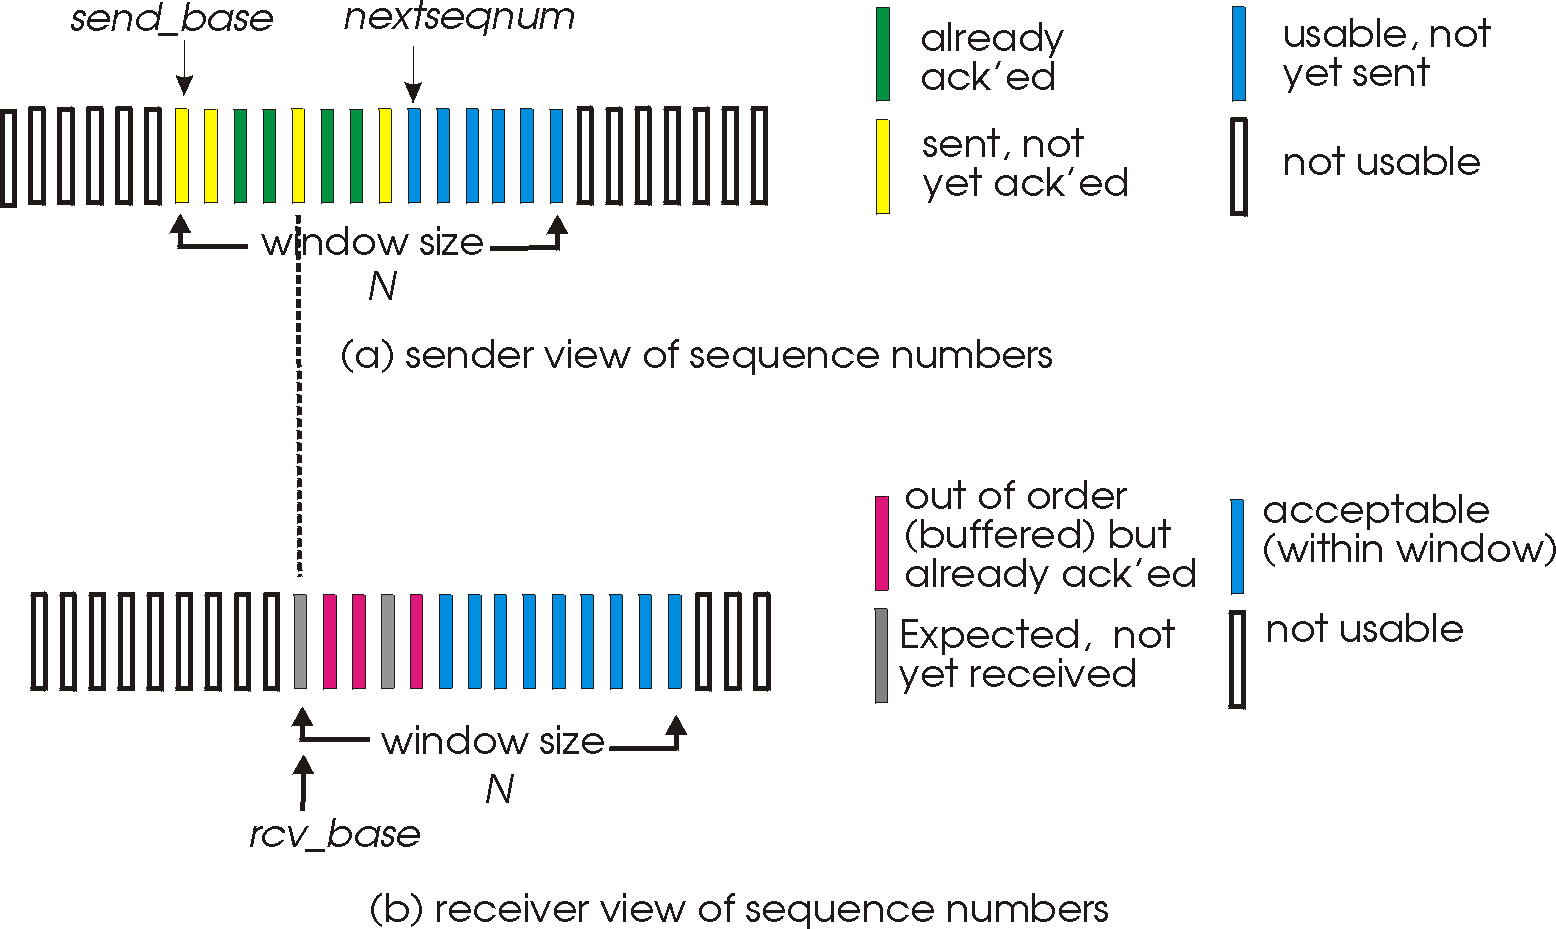 SR sender and recevier views of the sequence number space